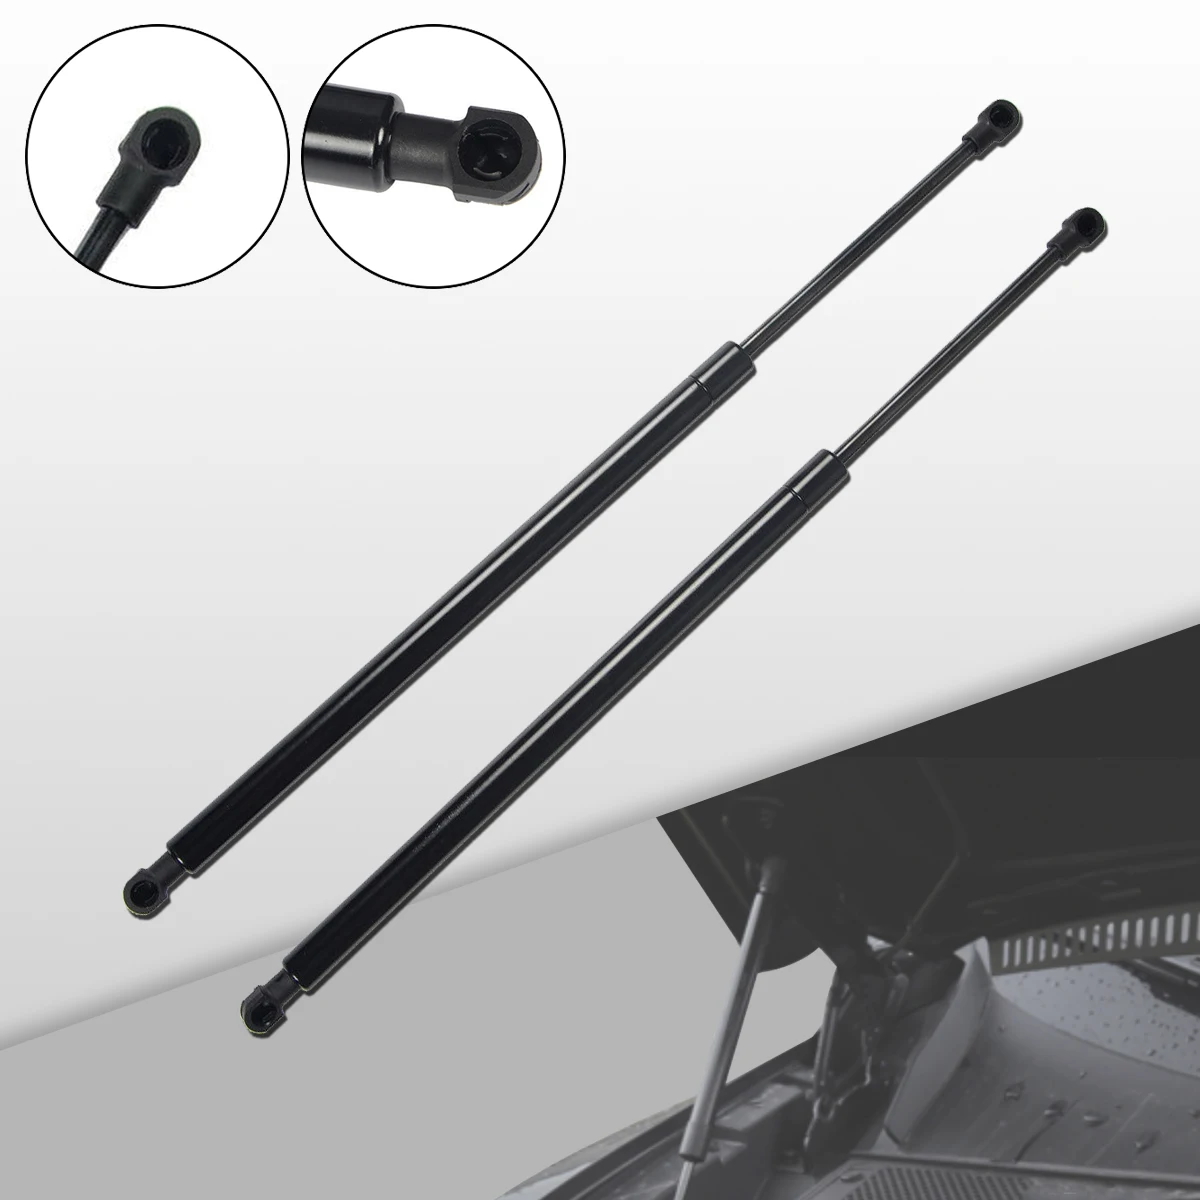 2 PCS Rear Tailgate Lift Supports Shock Struts for Land Rover Range Rover 2003-2012 SG387003 